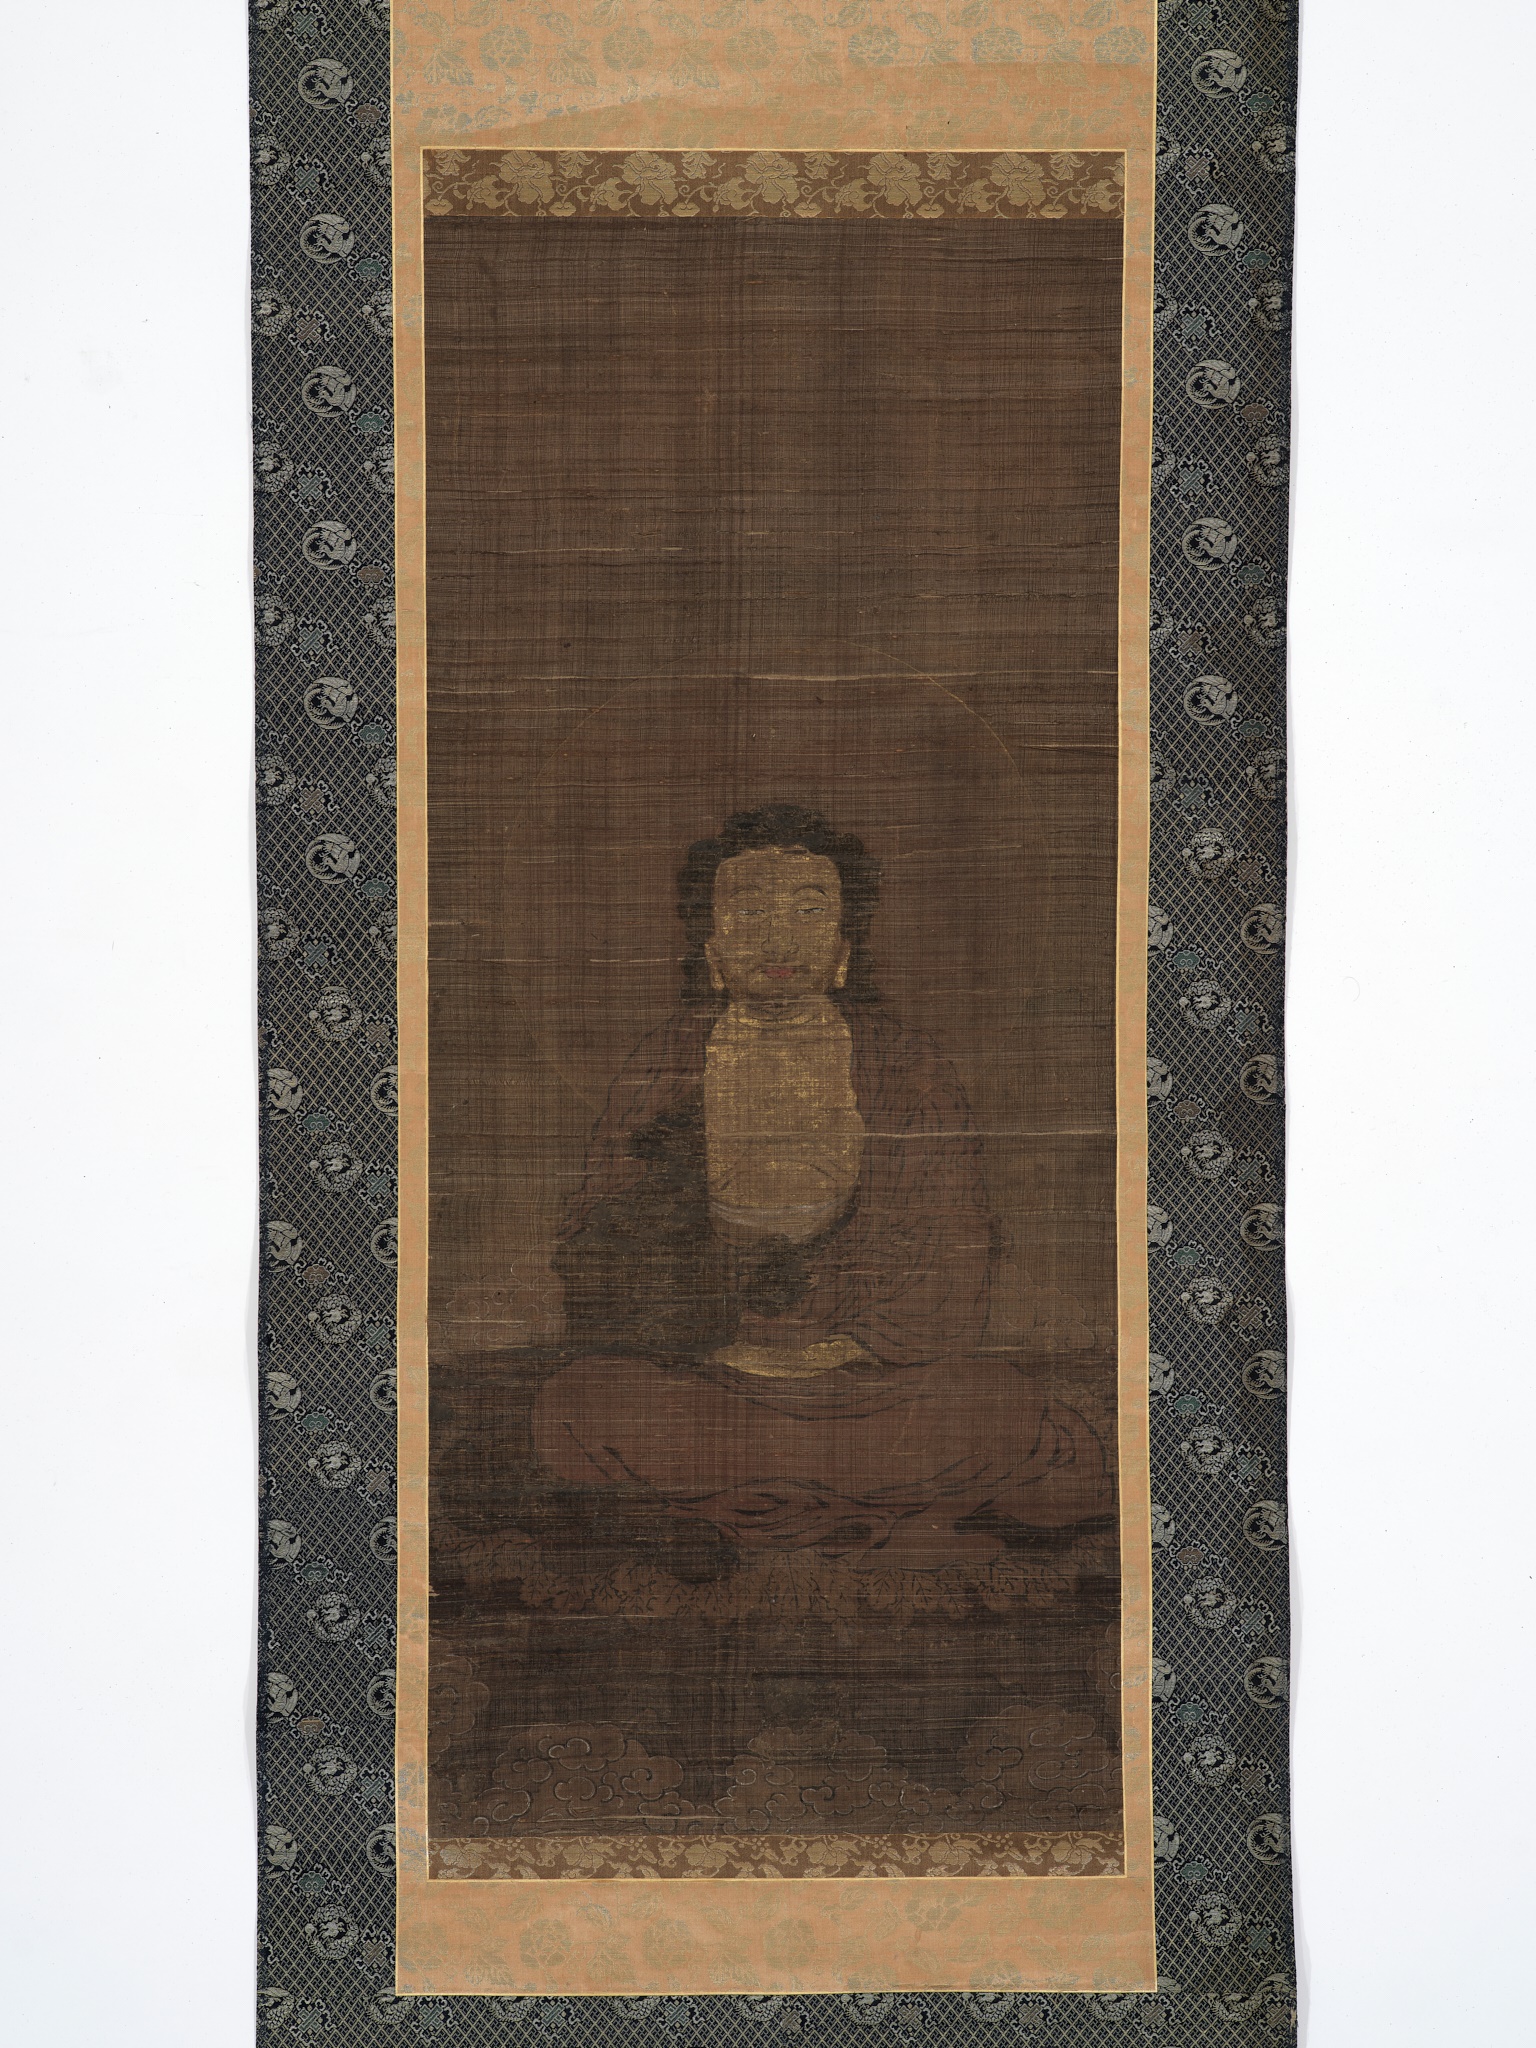 A VERY RARE AND EARLY JAPANESE HANGING SCROLL PAINTING OF AN IMMORTAL, 14TH-16TH CENTURY - Image 2 of 6